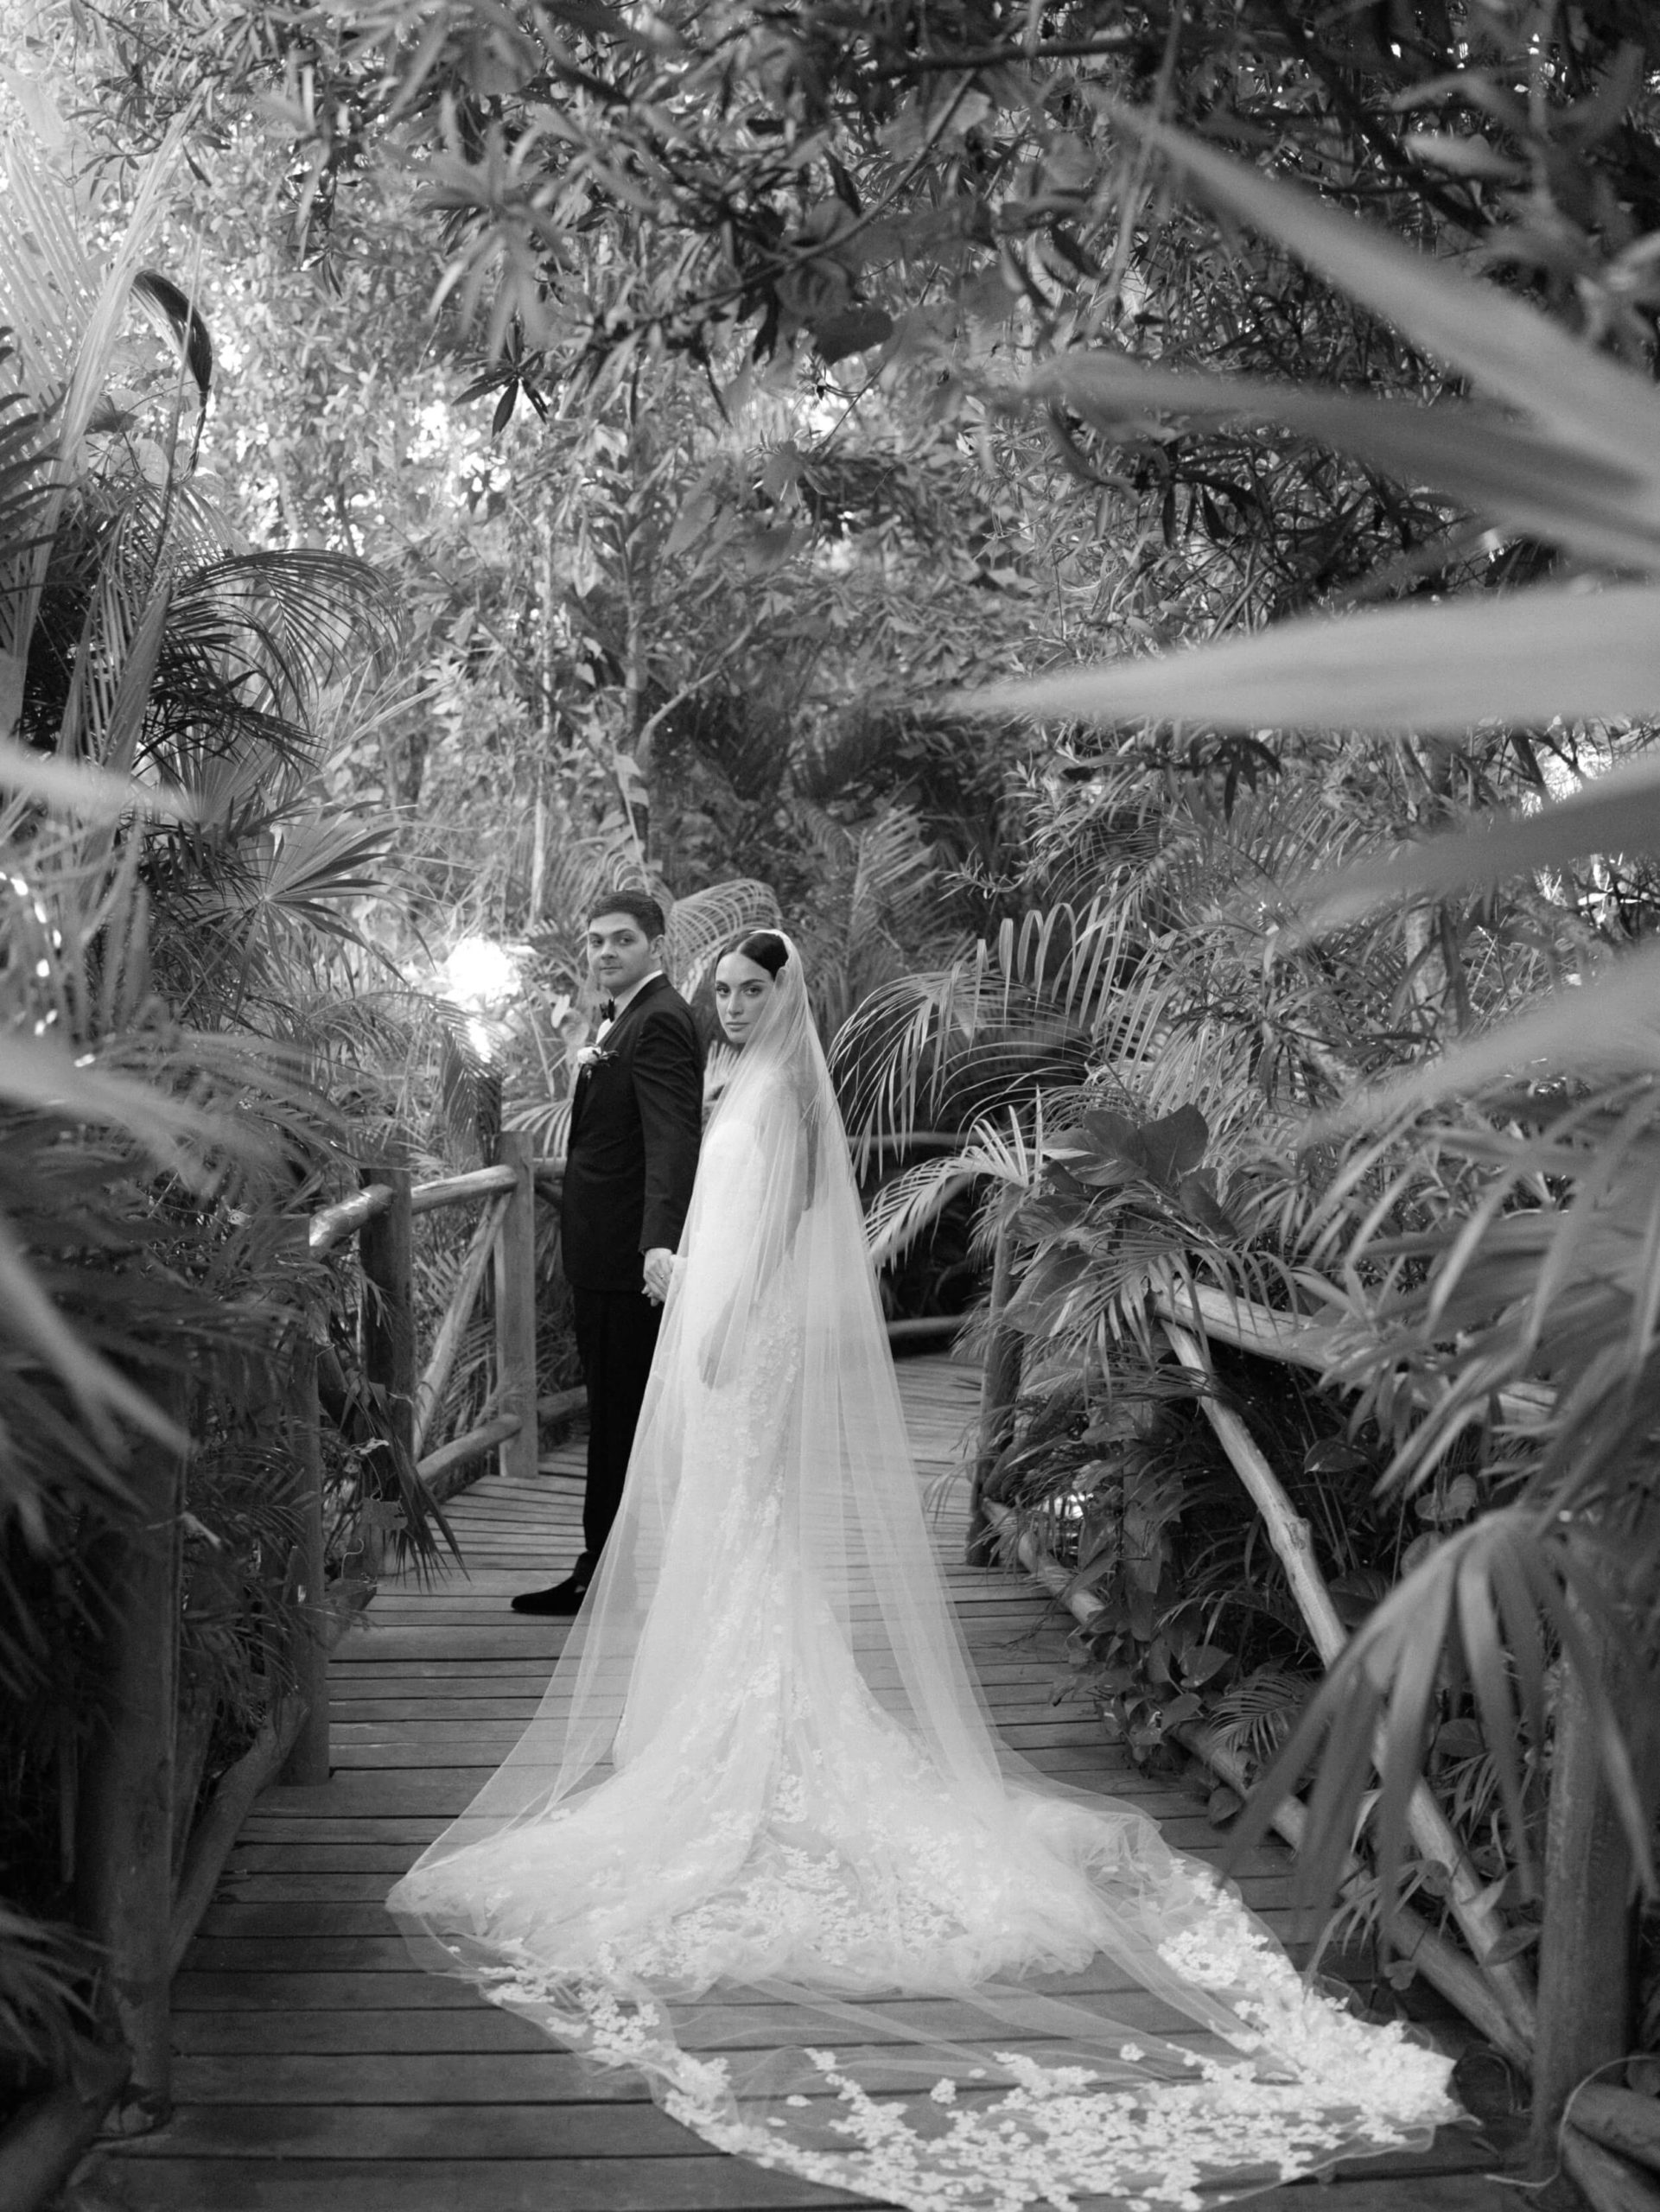 Danielle and Lucas posing under the trees on a boardwalk after their wedding at the Rosewood Mayakoba Resort